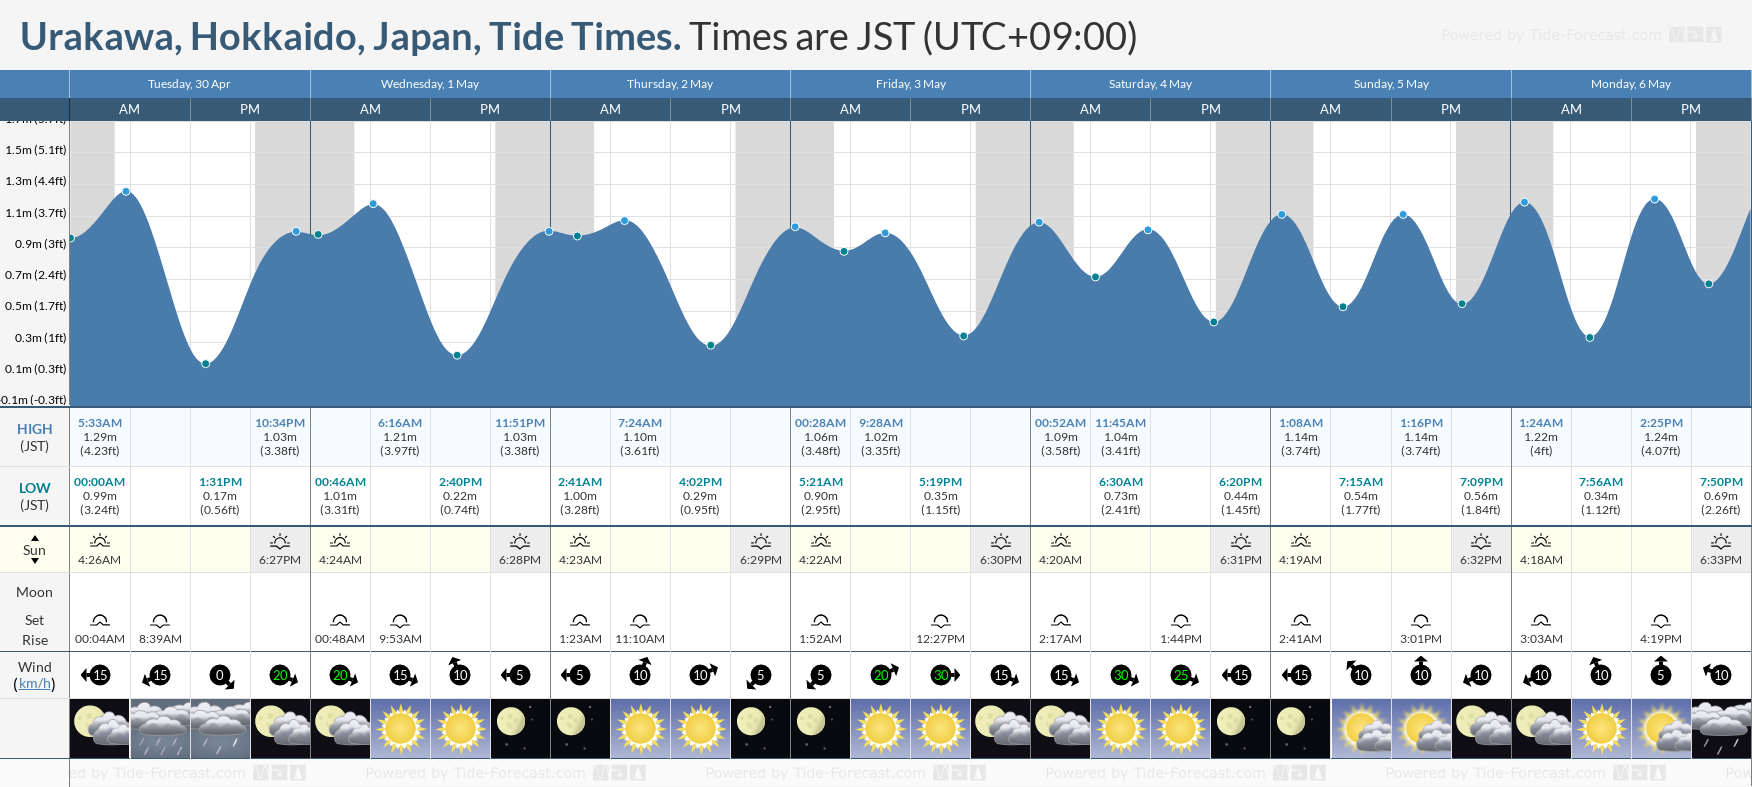 Urakawa, Hokkaido, Japan Tide Chart including high and low tide tide times for the next 7 days